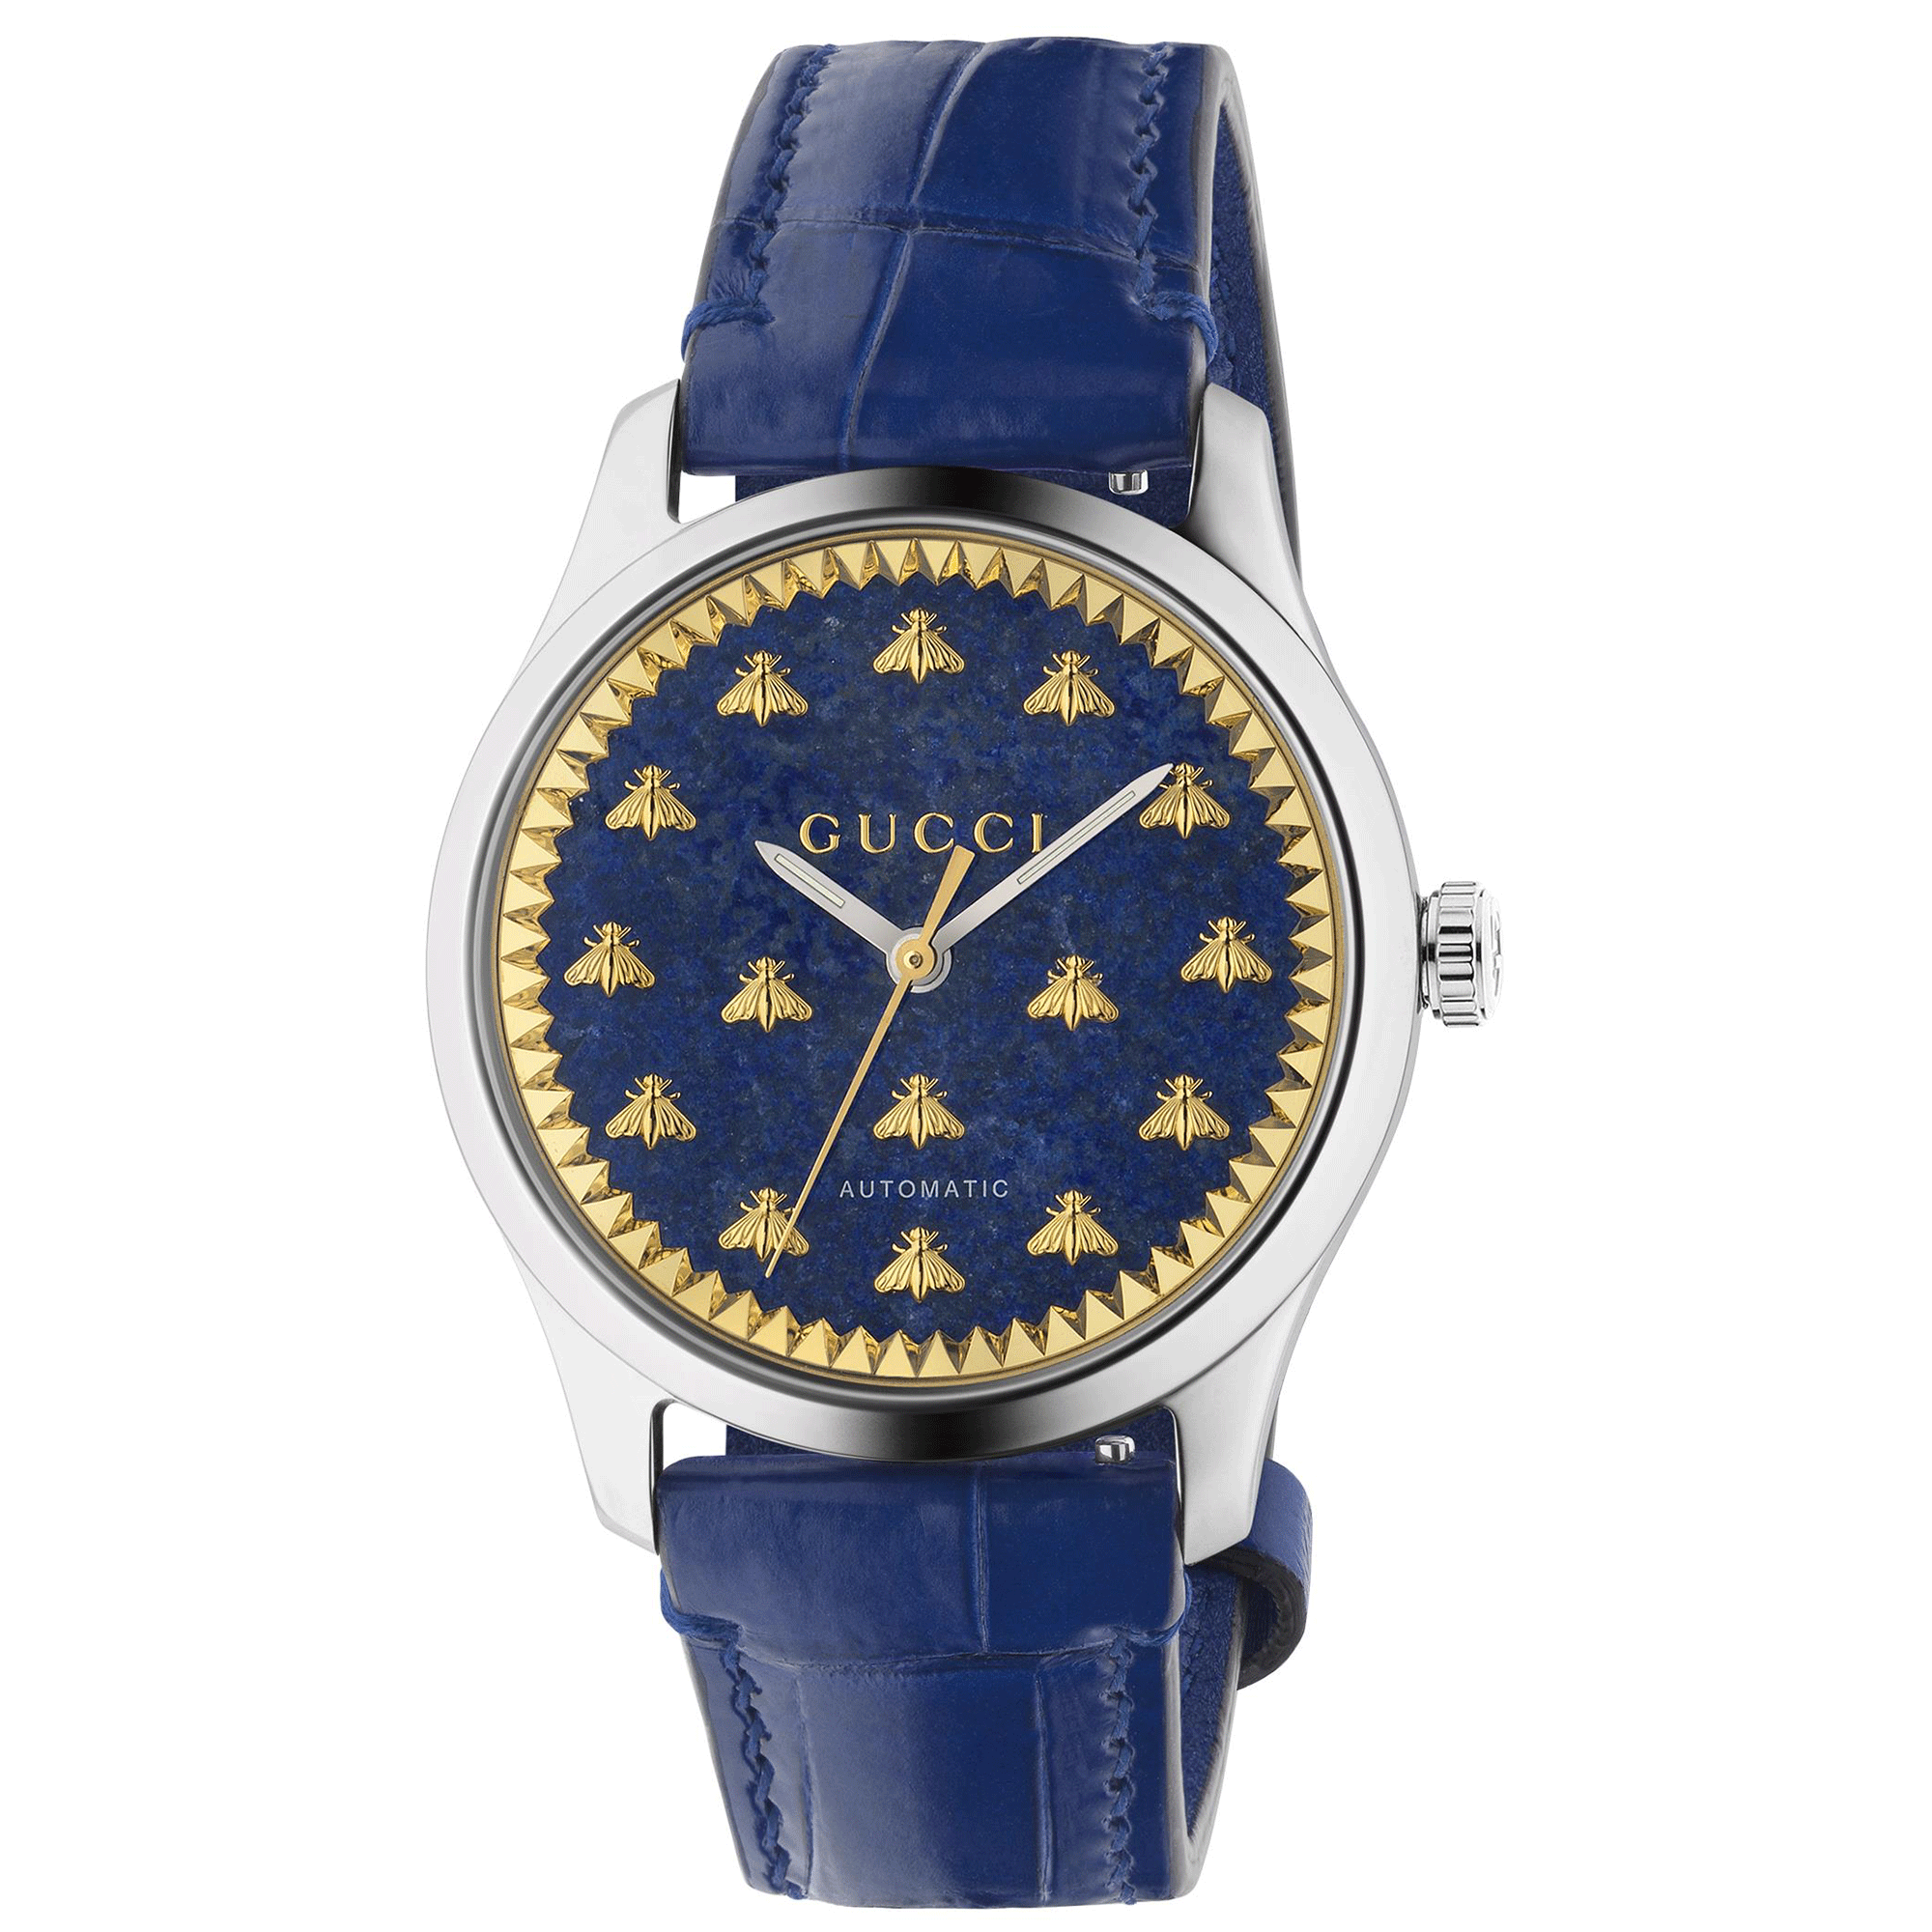 Gucci G-Timeless 38mm Automatic Blue Leather Strap Watch With A Lapis Lazuli  Dial.